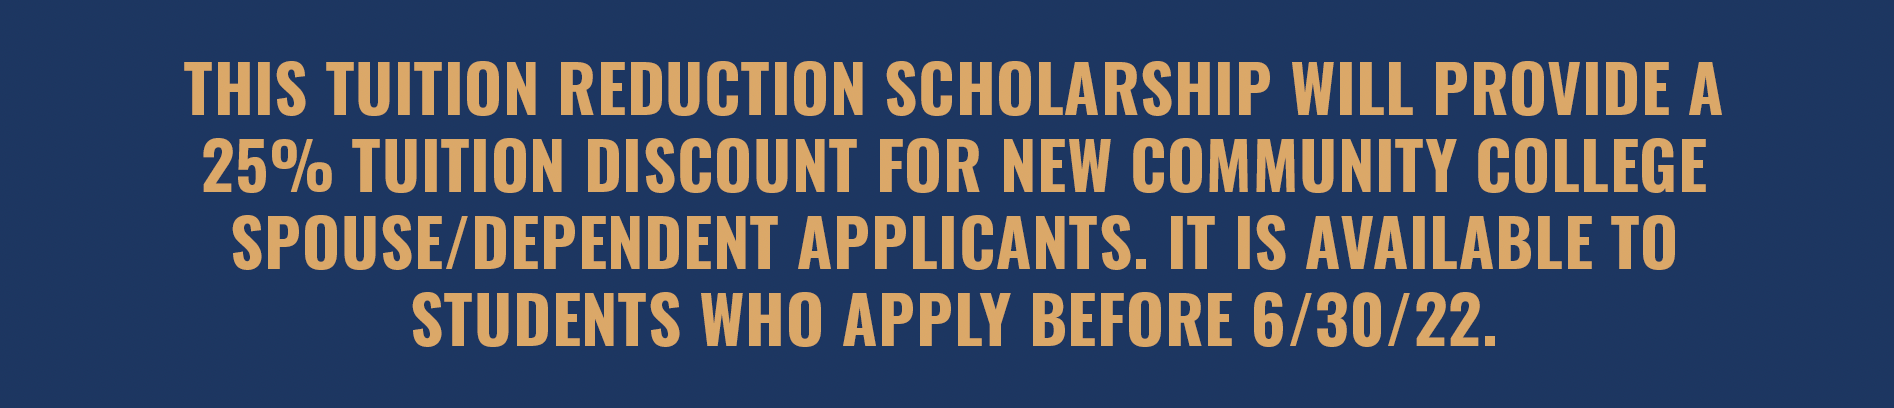 This scholarship will provide a 25% tuition reduction scholarship for new community college spouse/dependent applicants. It is available to students who apply before 6/30/22